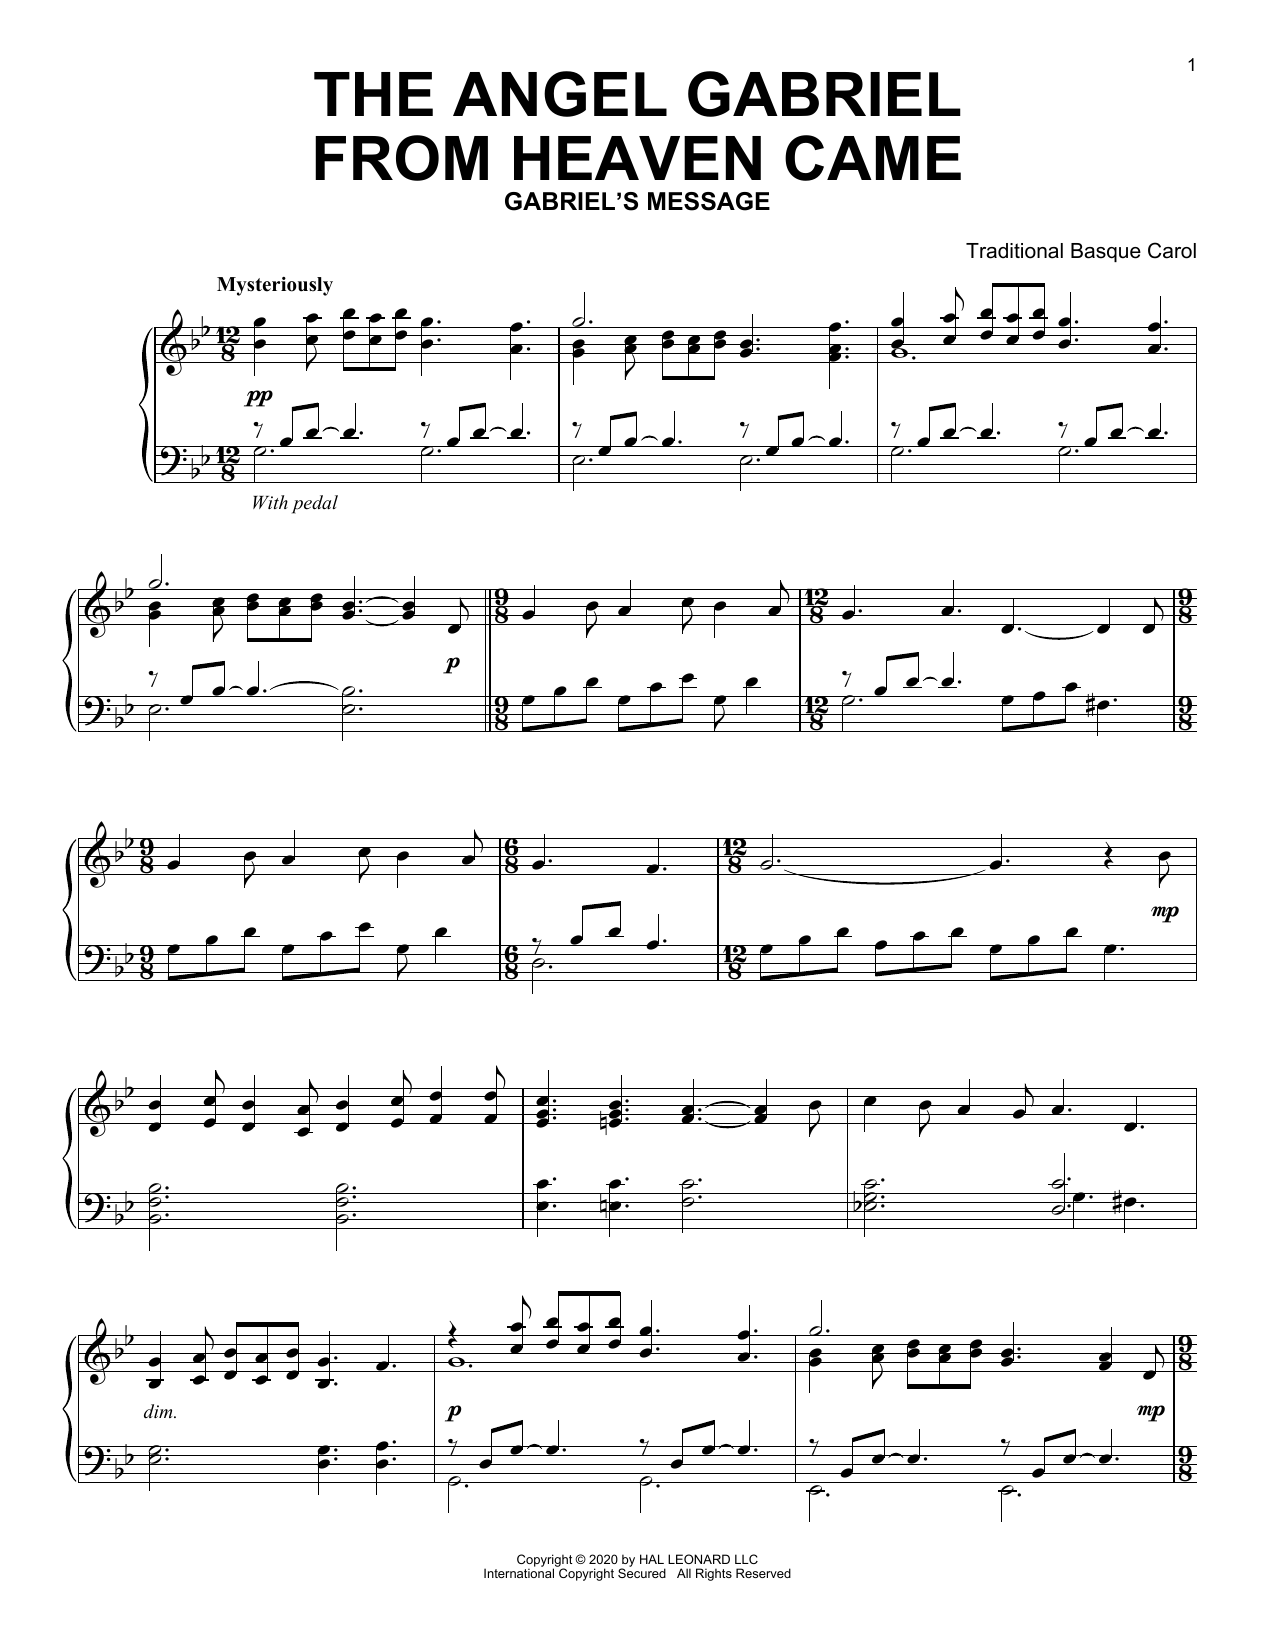 Download Traditional Basque Carol The Angel Gabriel From Heaven Came Sheet Music